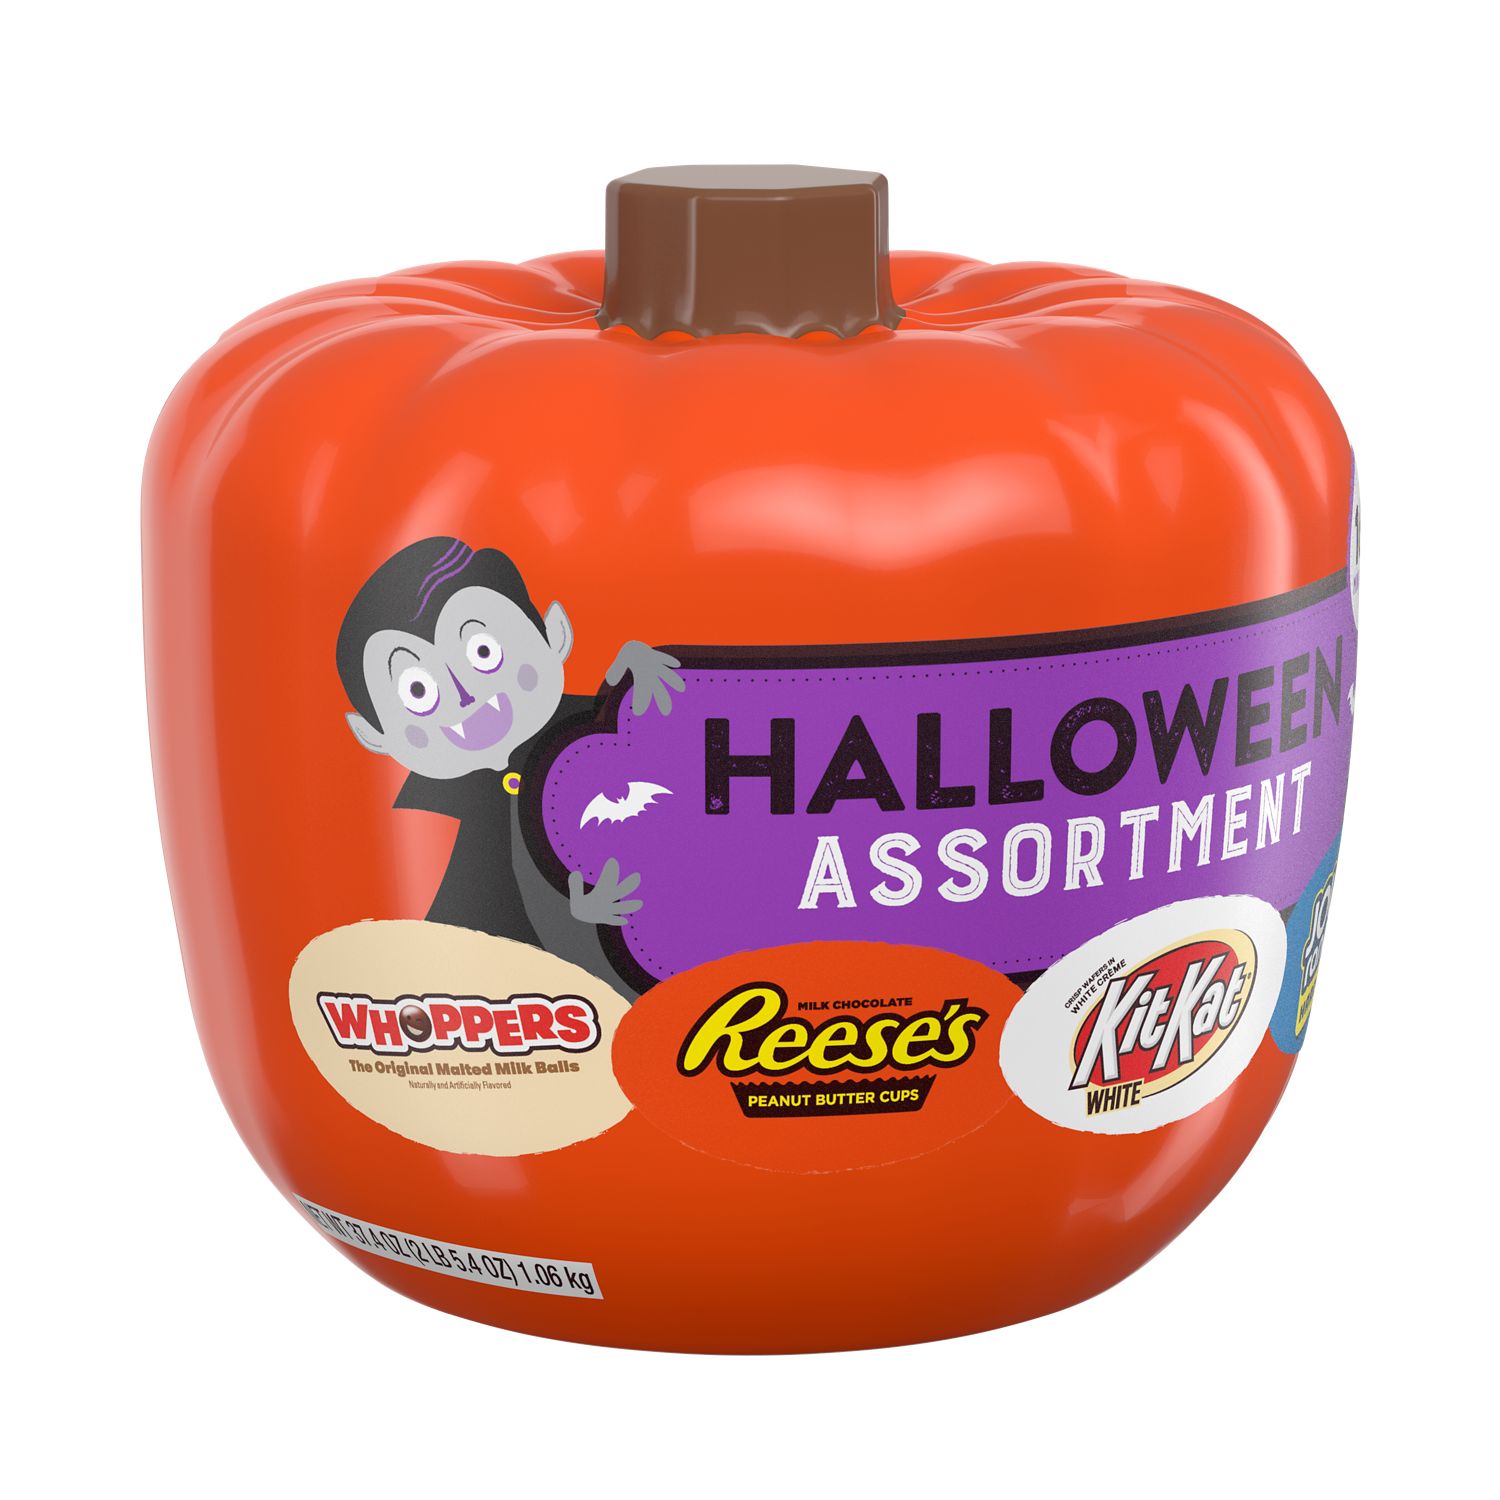 Hershey, Miniatures Halloween Assortment Chocolate, White Creme and Sweets Assortment Candy, Halloween, 37.4 oz, Plastic Pumpkin Candy Bowl (160 Pieces) - image 1 of 6